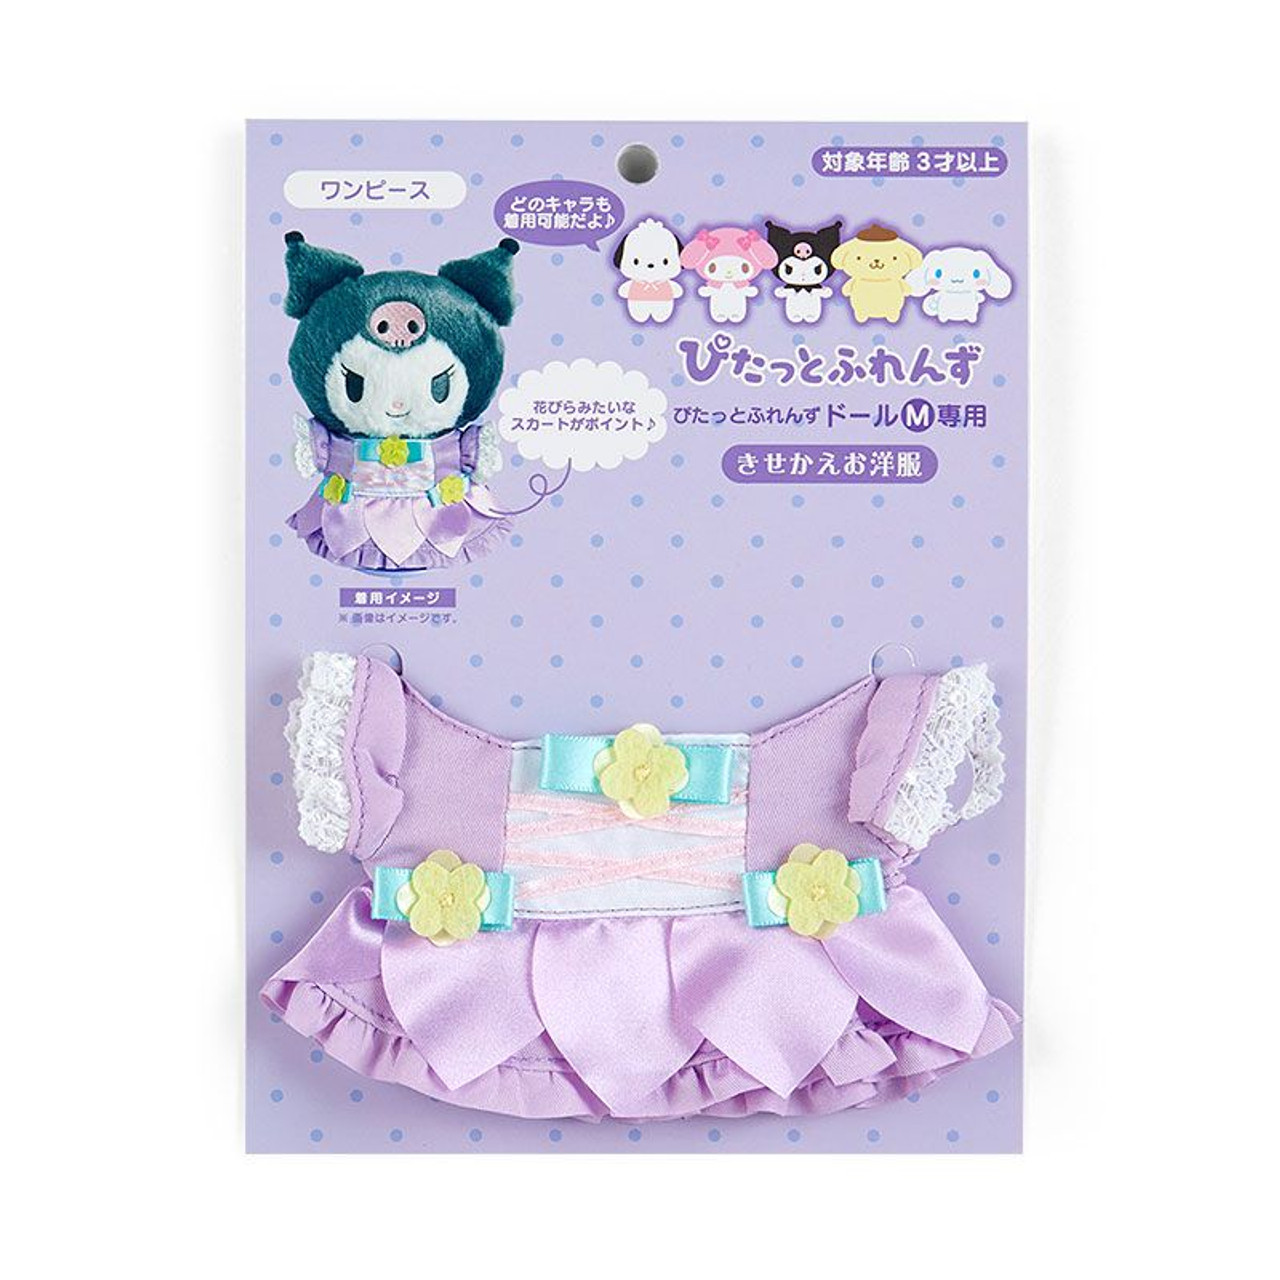 Dress-Up Clothes for Plush Toy Purple Dress (Pitatto Friends)